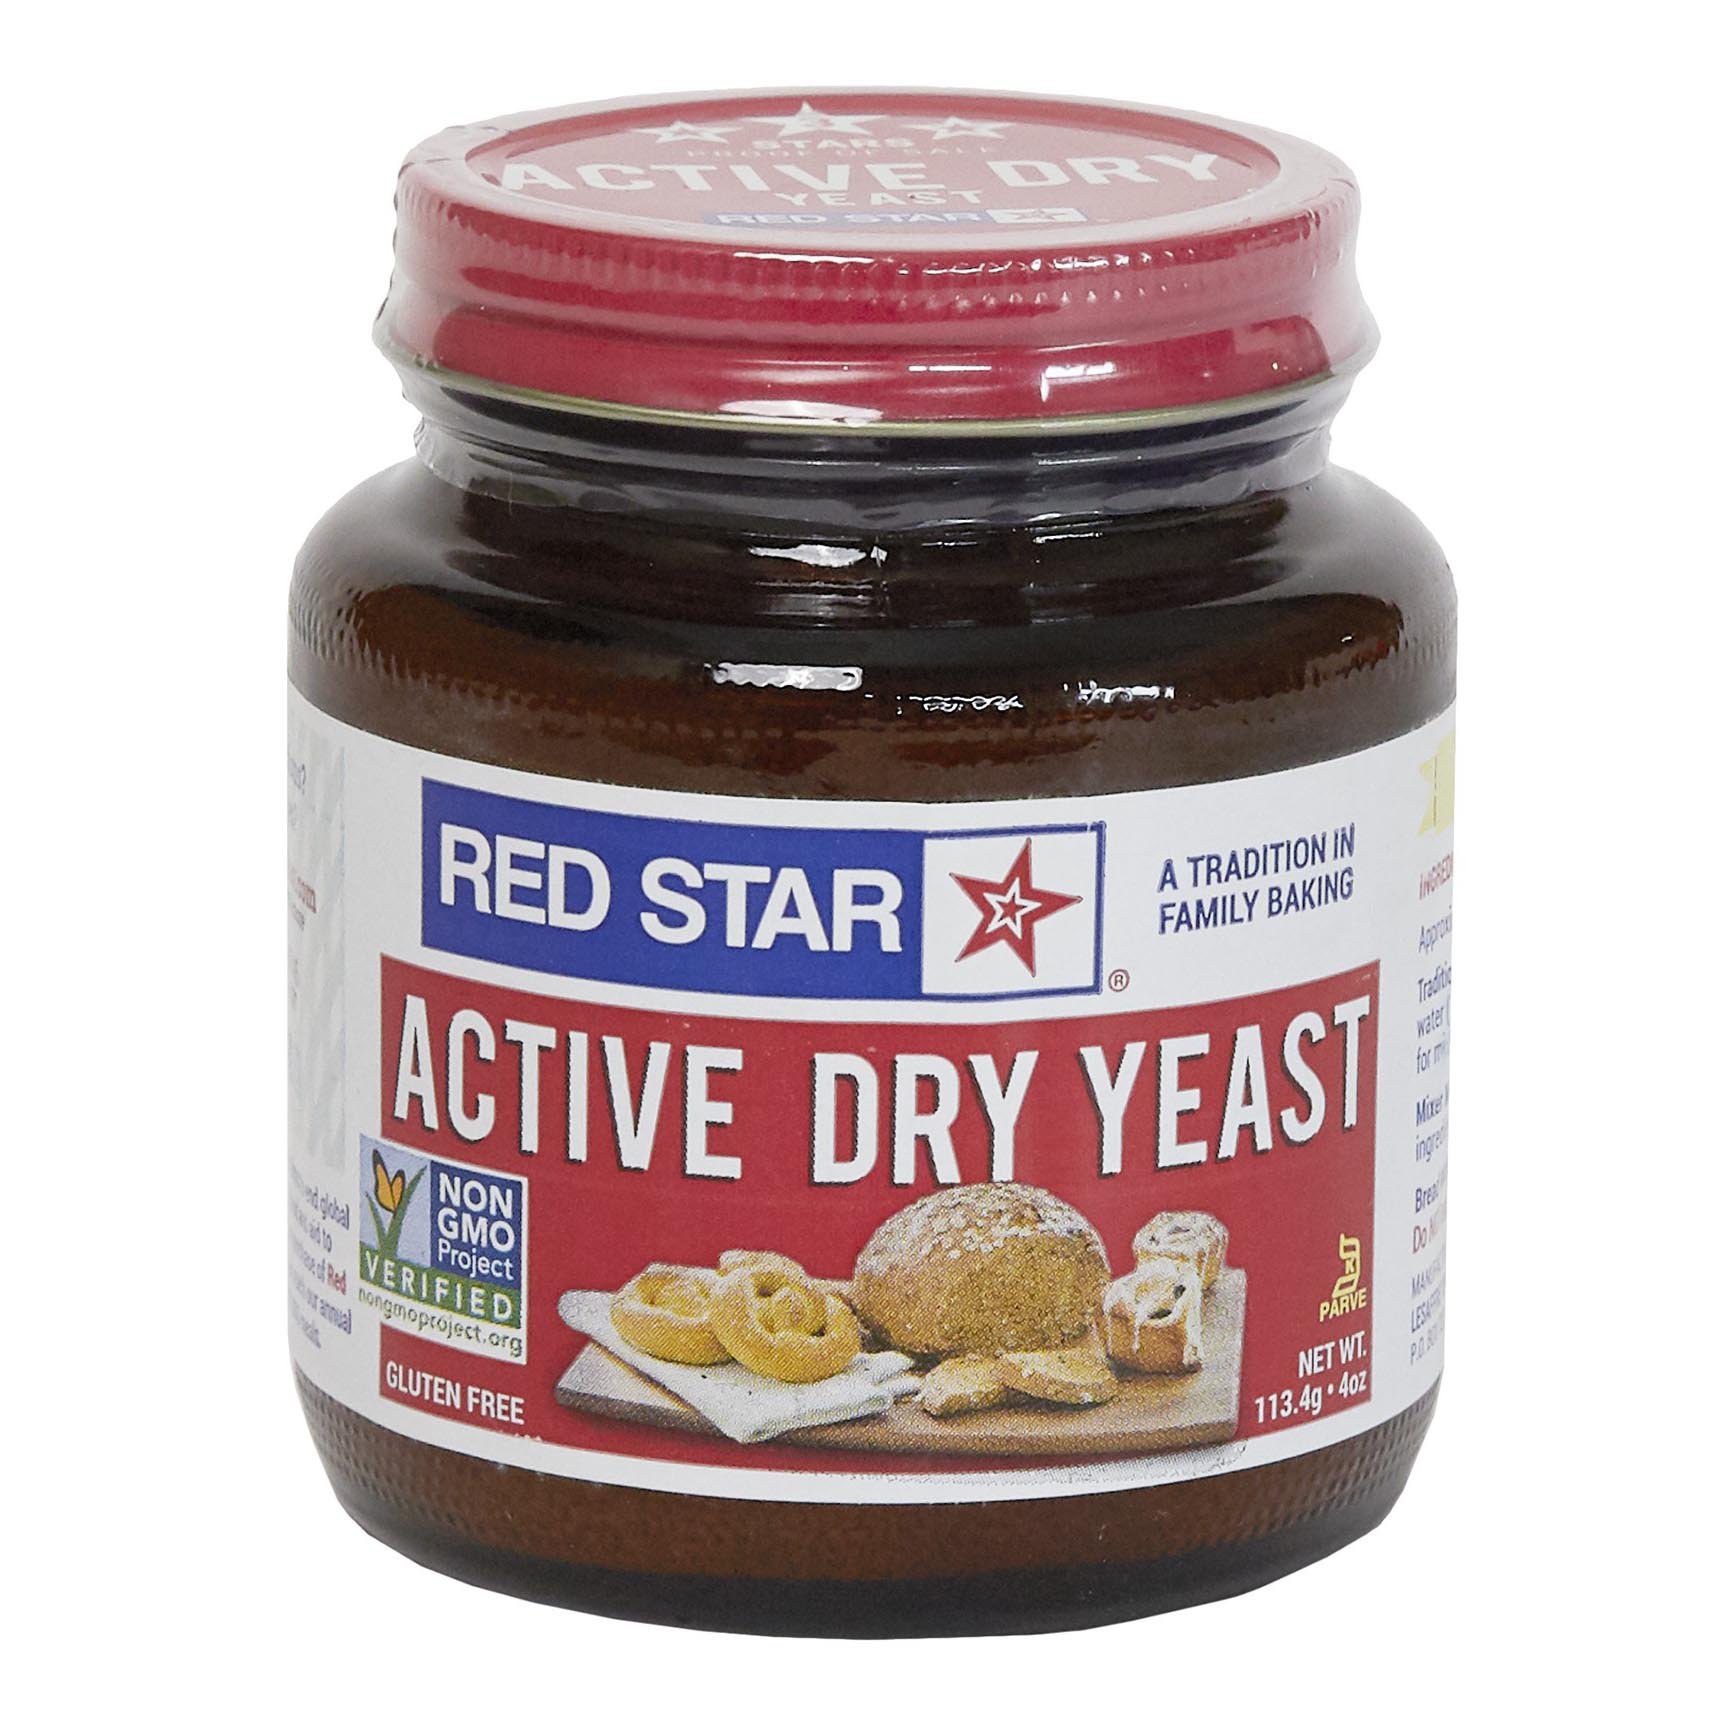 Red Star Original Instant Dry Quick Rise Yeast - Shop Yeast at H-E-B